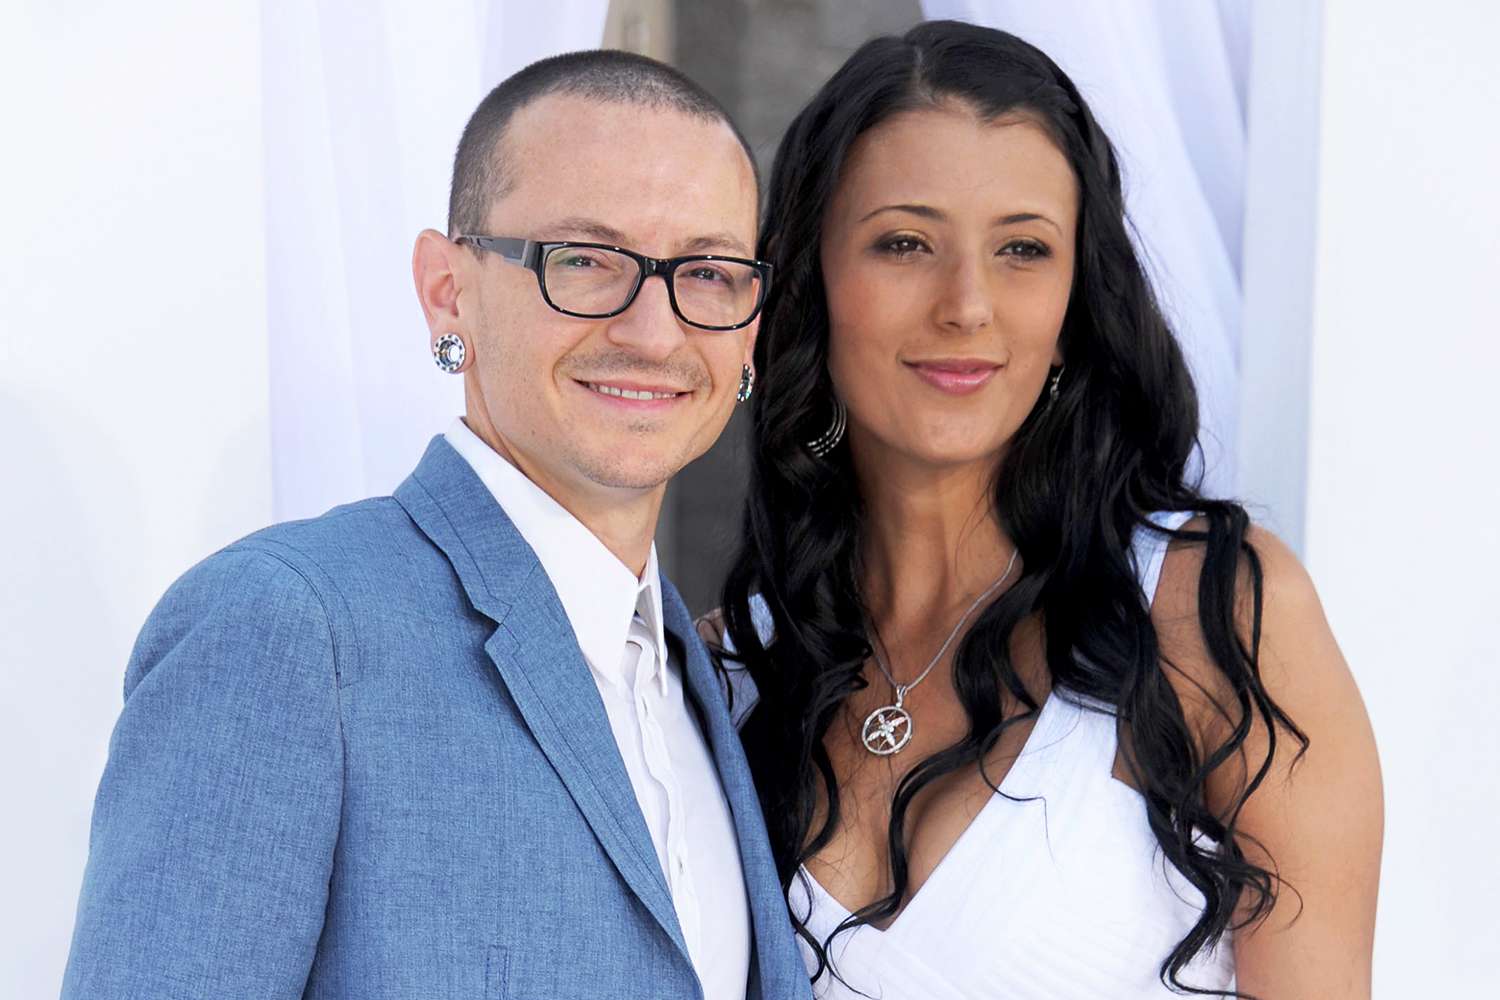 Chester Bennington of Linkin Park and wife Talinda Ann Bentley arrive at the 2012 Billboard Music Awards at MGM Grand on May 20, 2012 in Las Vegas, Nevada.